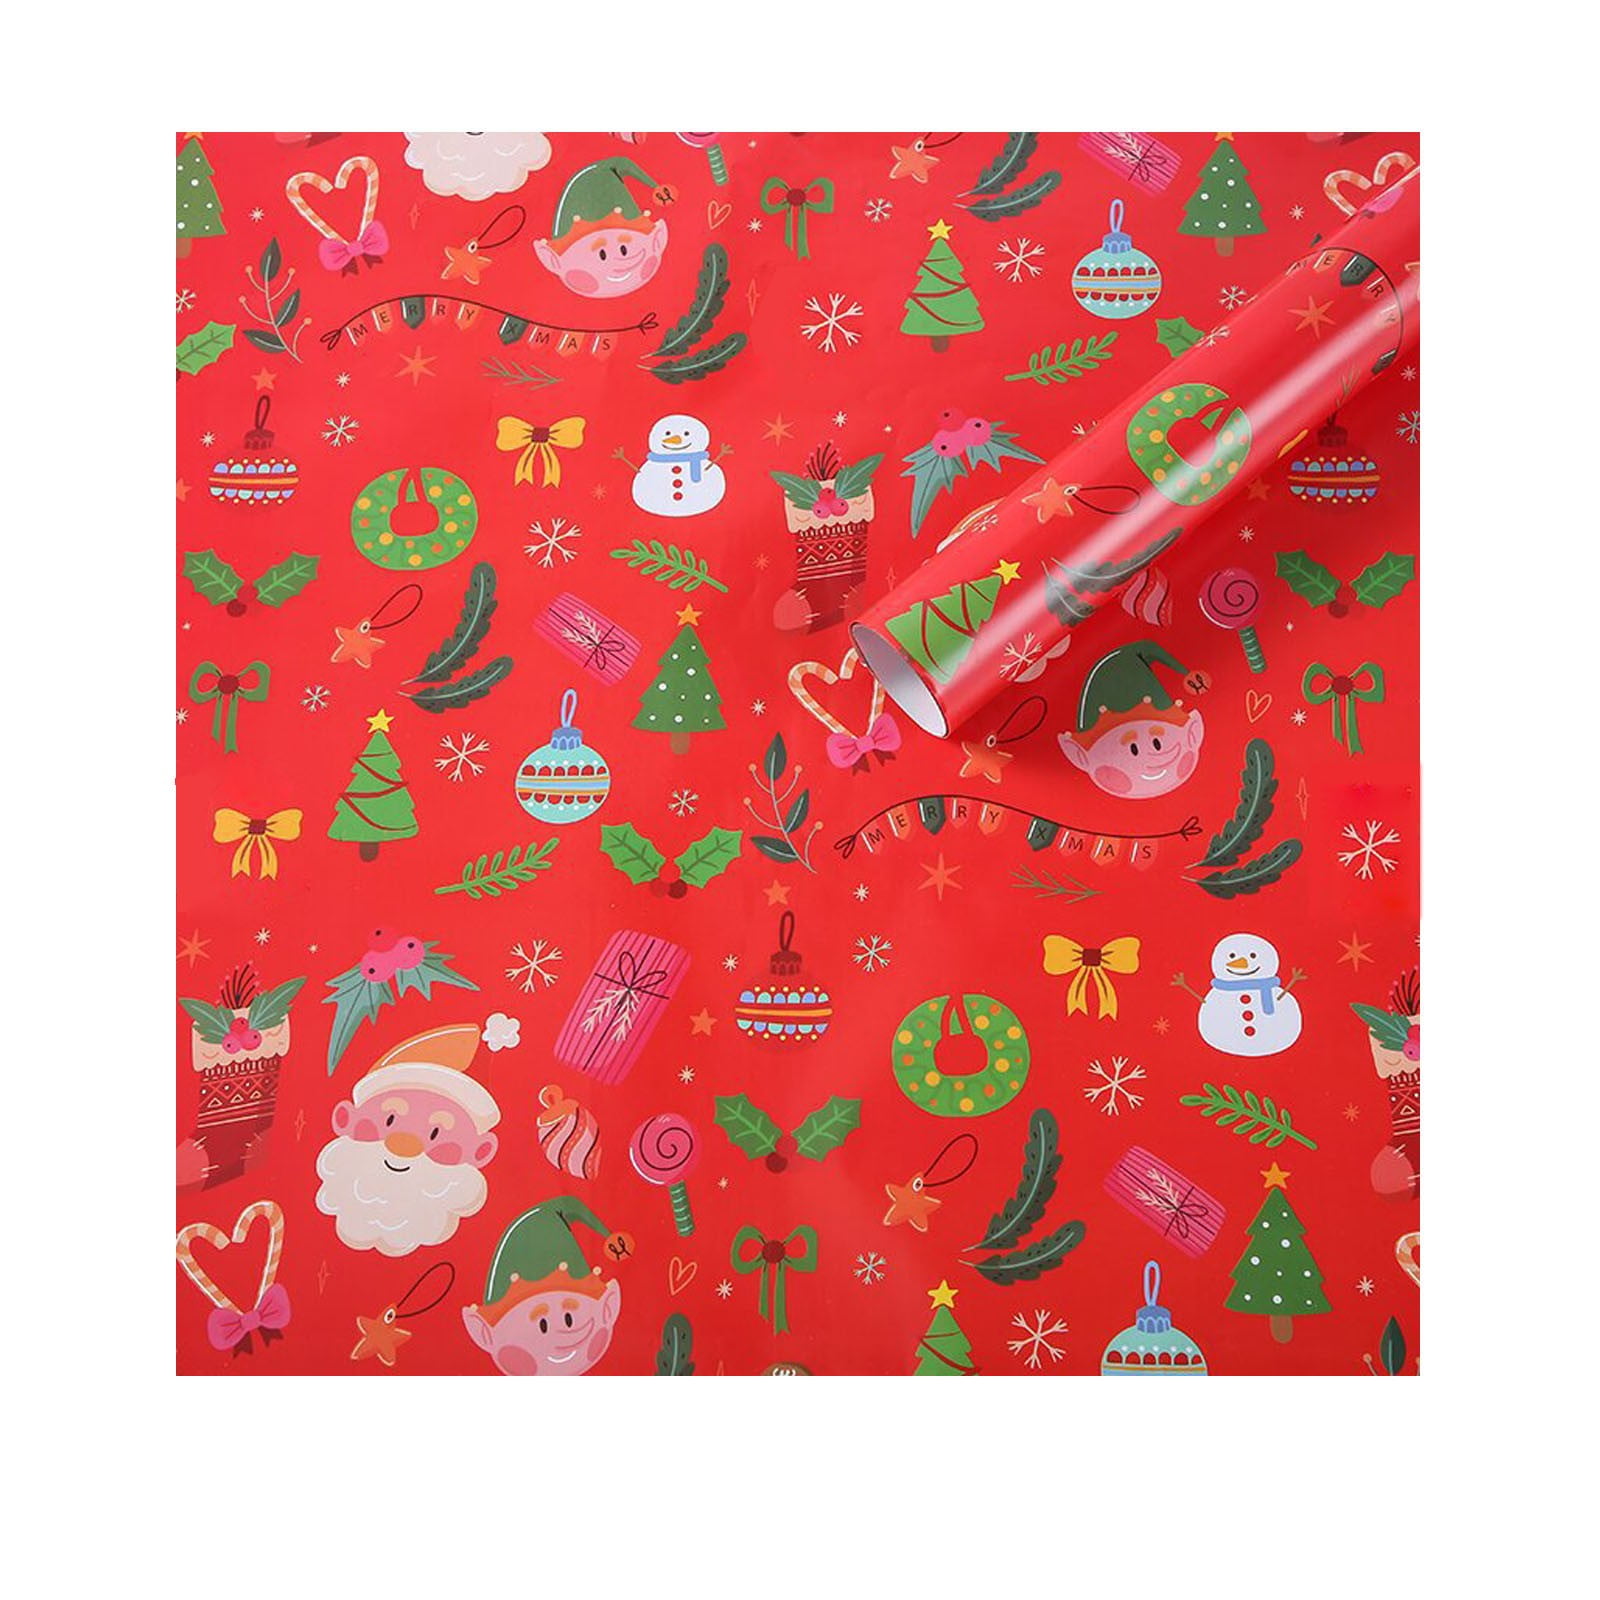 Christmas Wrapping Paper Traditional Roll Bundle (25 Sq ft per Roll, 100 Total Sq ft), 4 Pack Jillson & Roberts